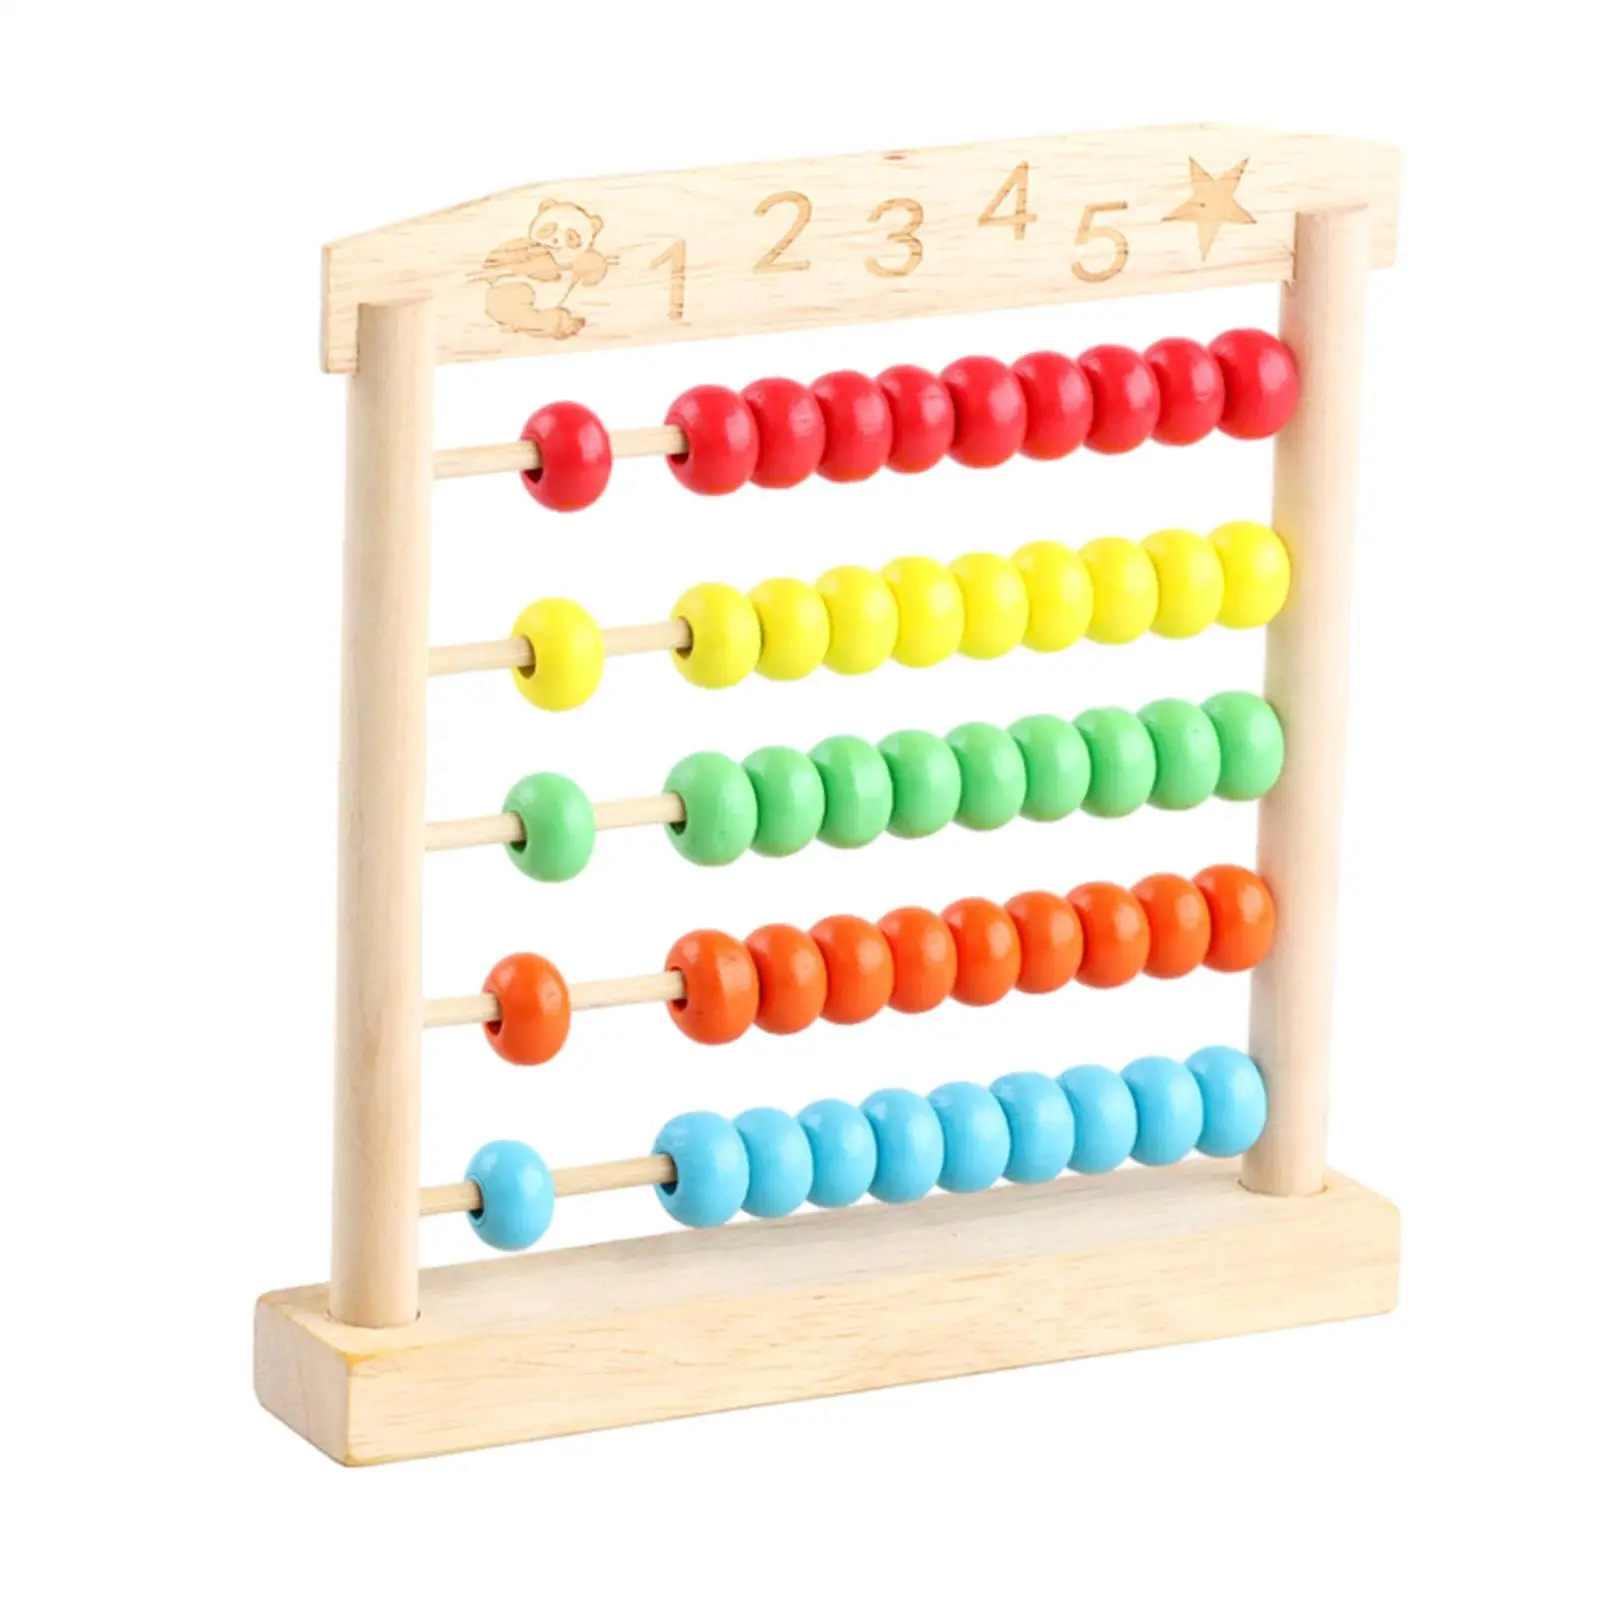 Counting Abacus Toy Math Manipulative Developmental Toy Montessori Toy Wooden Counting Frame for Kindergarten Preschool Baby